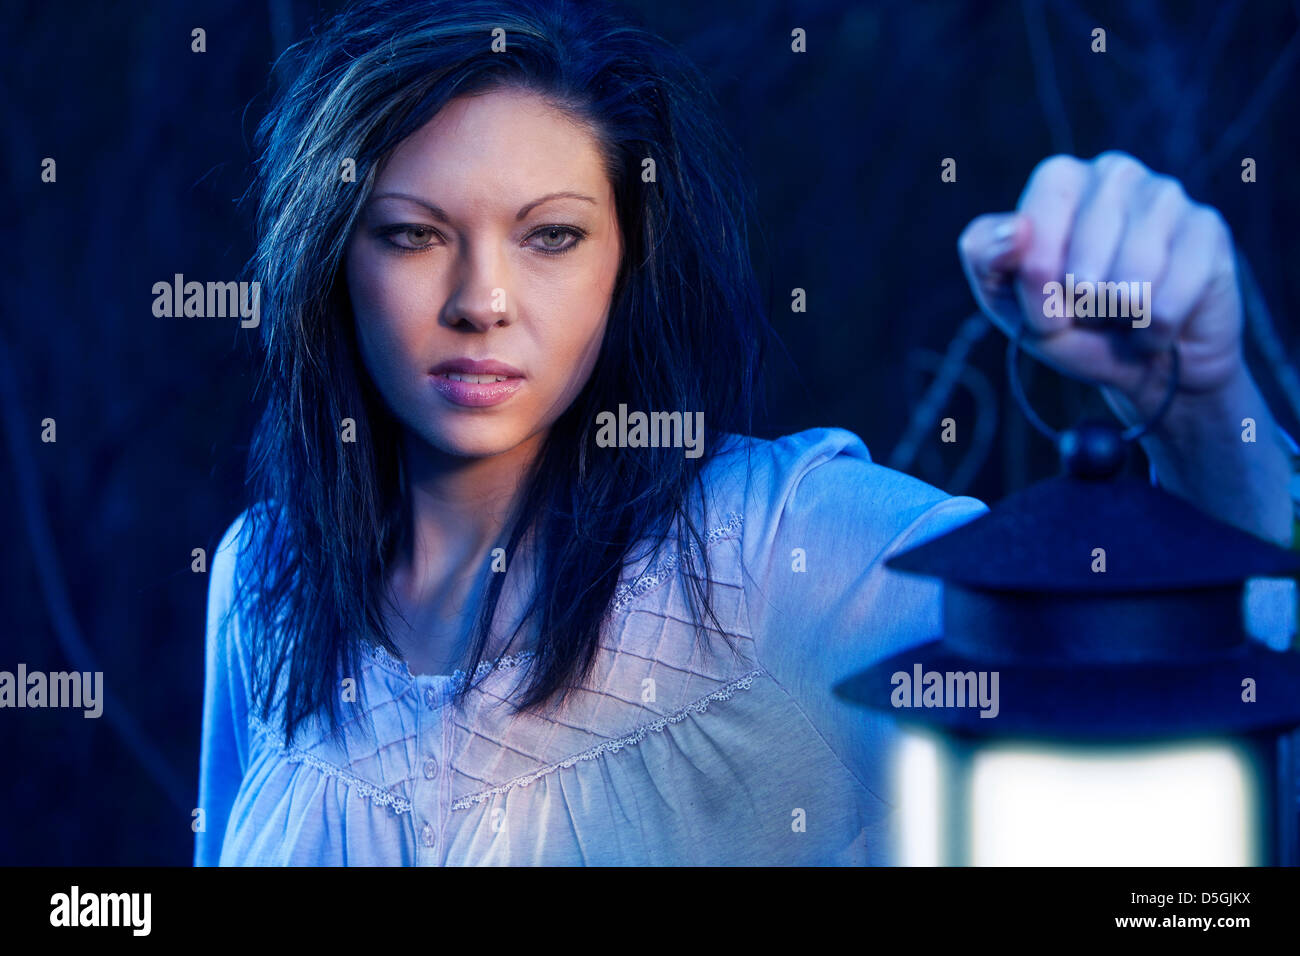 Woman with lantern in blue light Stock Photo